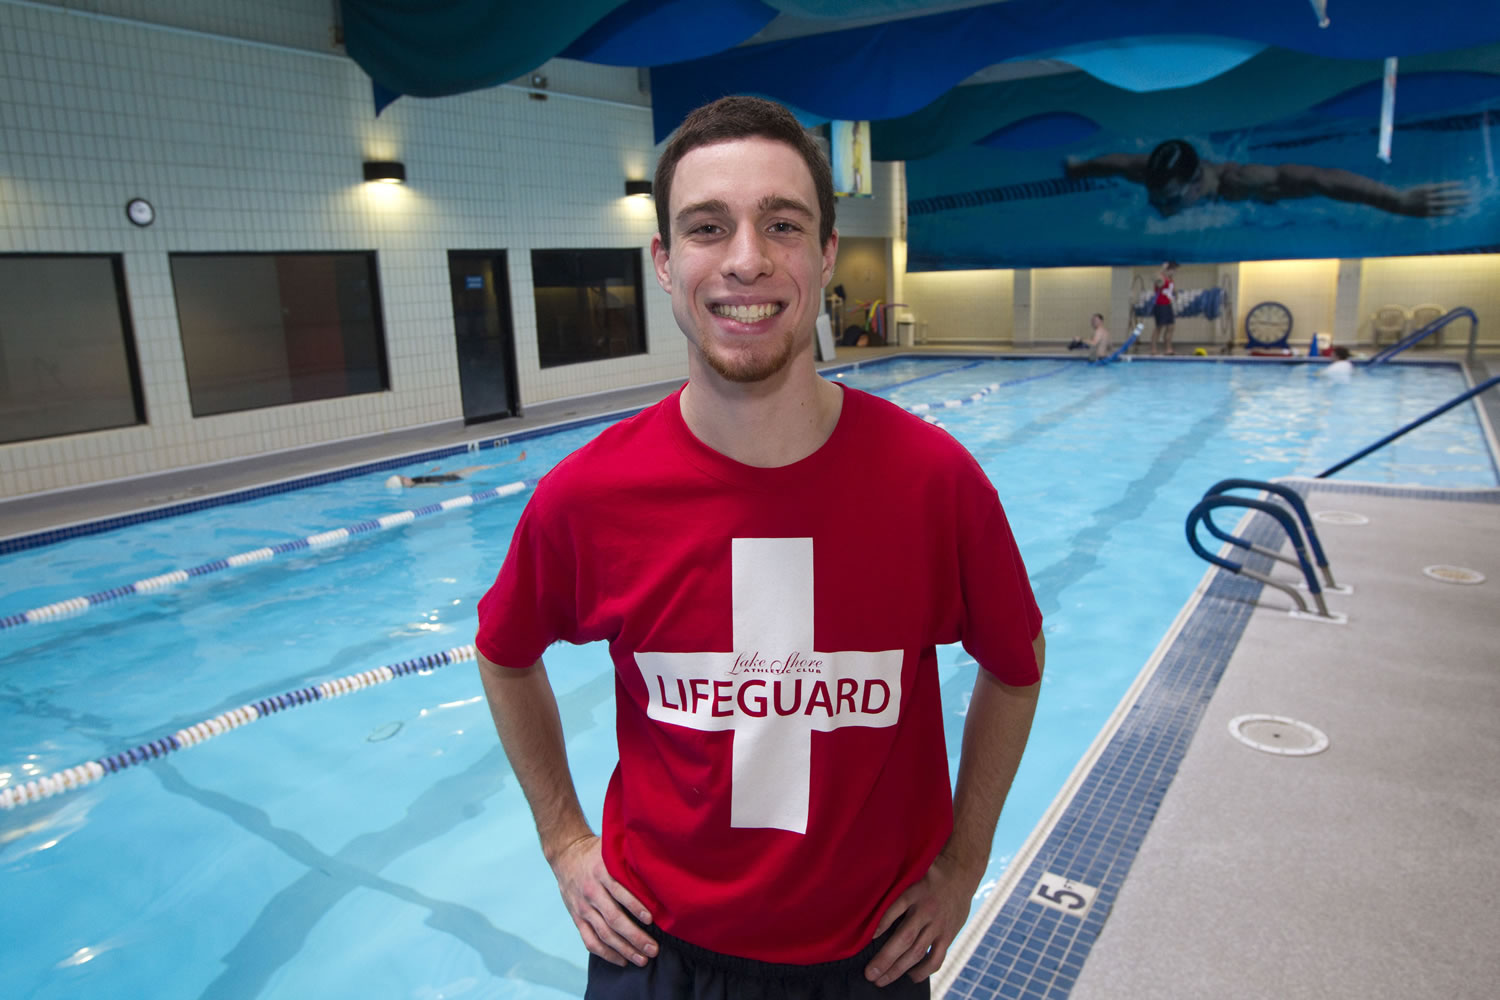 Carter Coval, a lifeguard at Lakeshore Athletic Club, saved a boy from drowning Friday night.